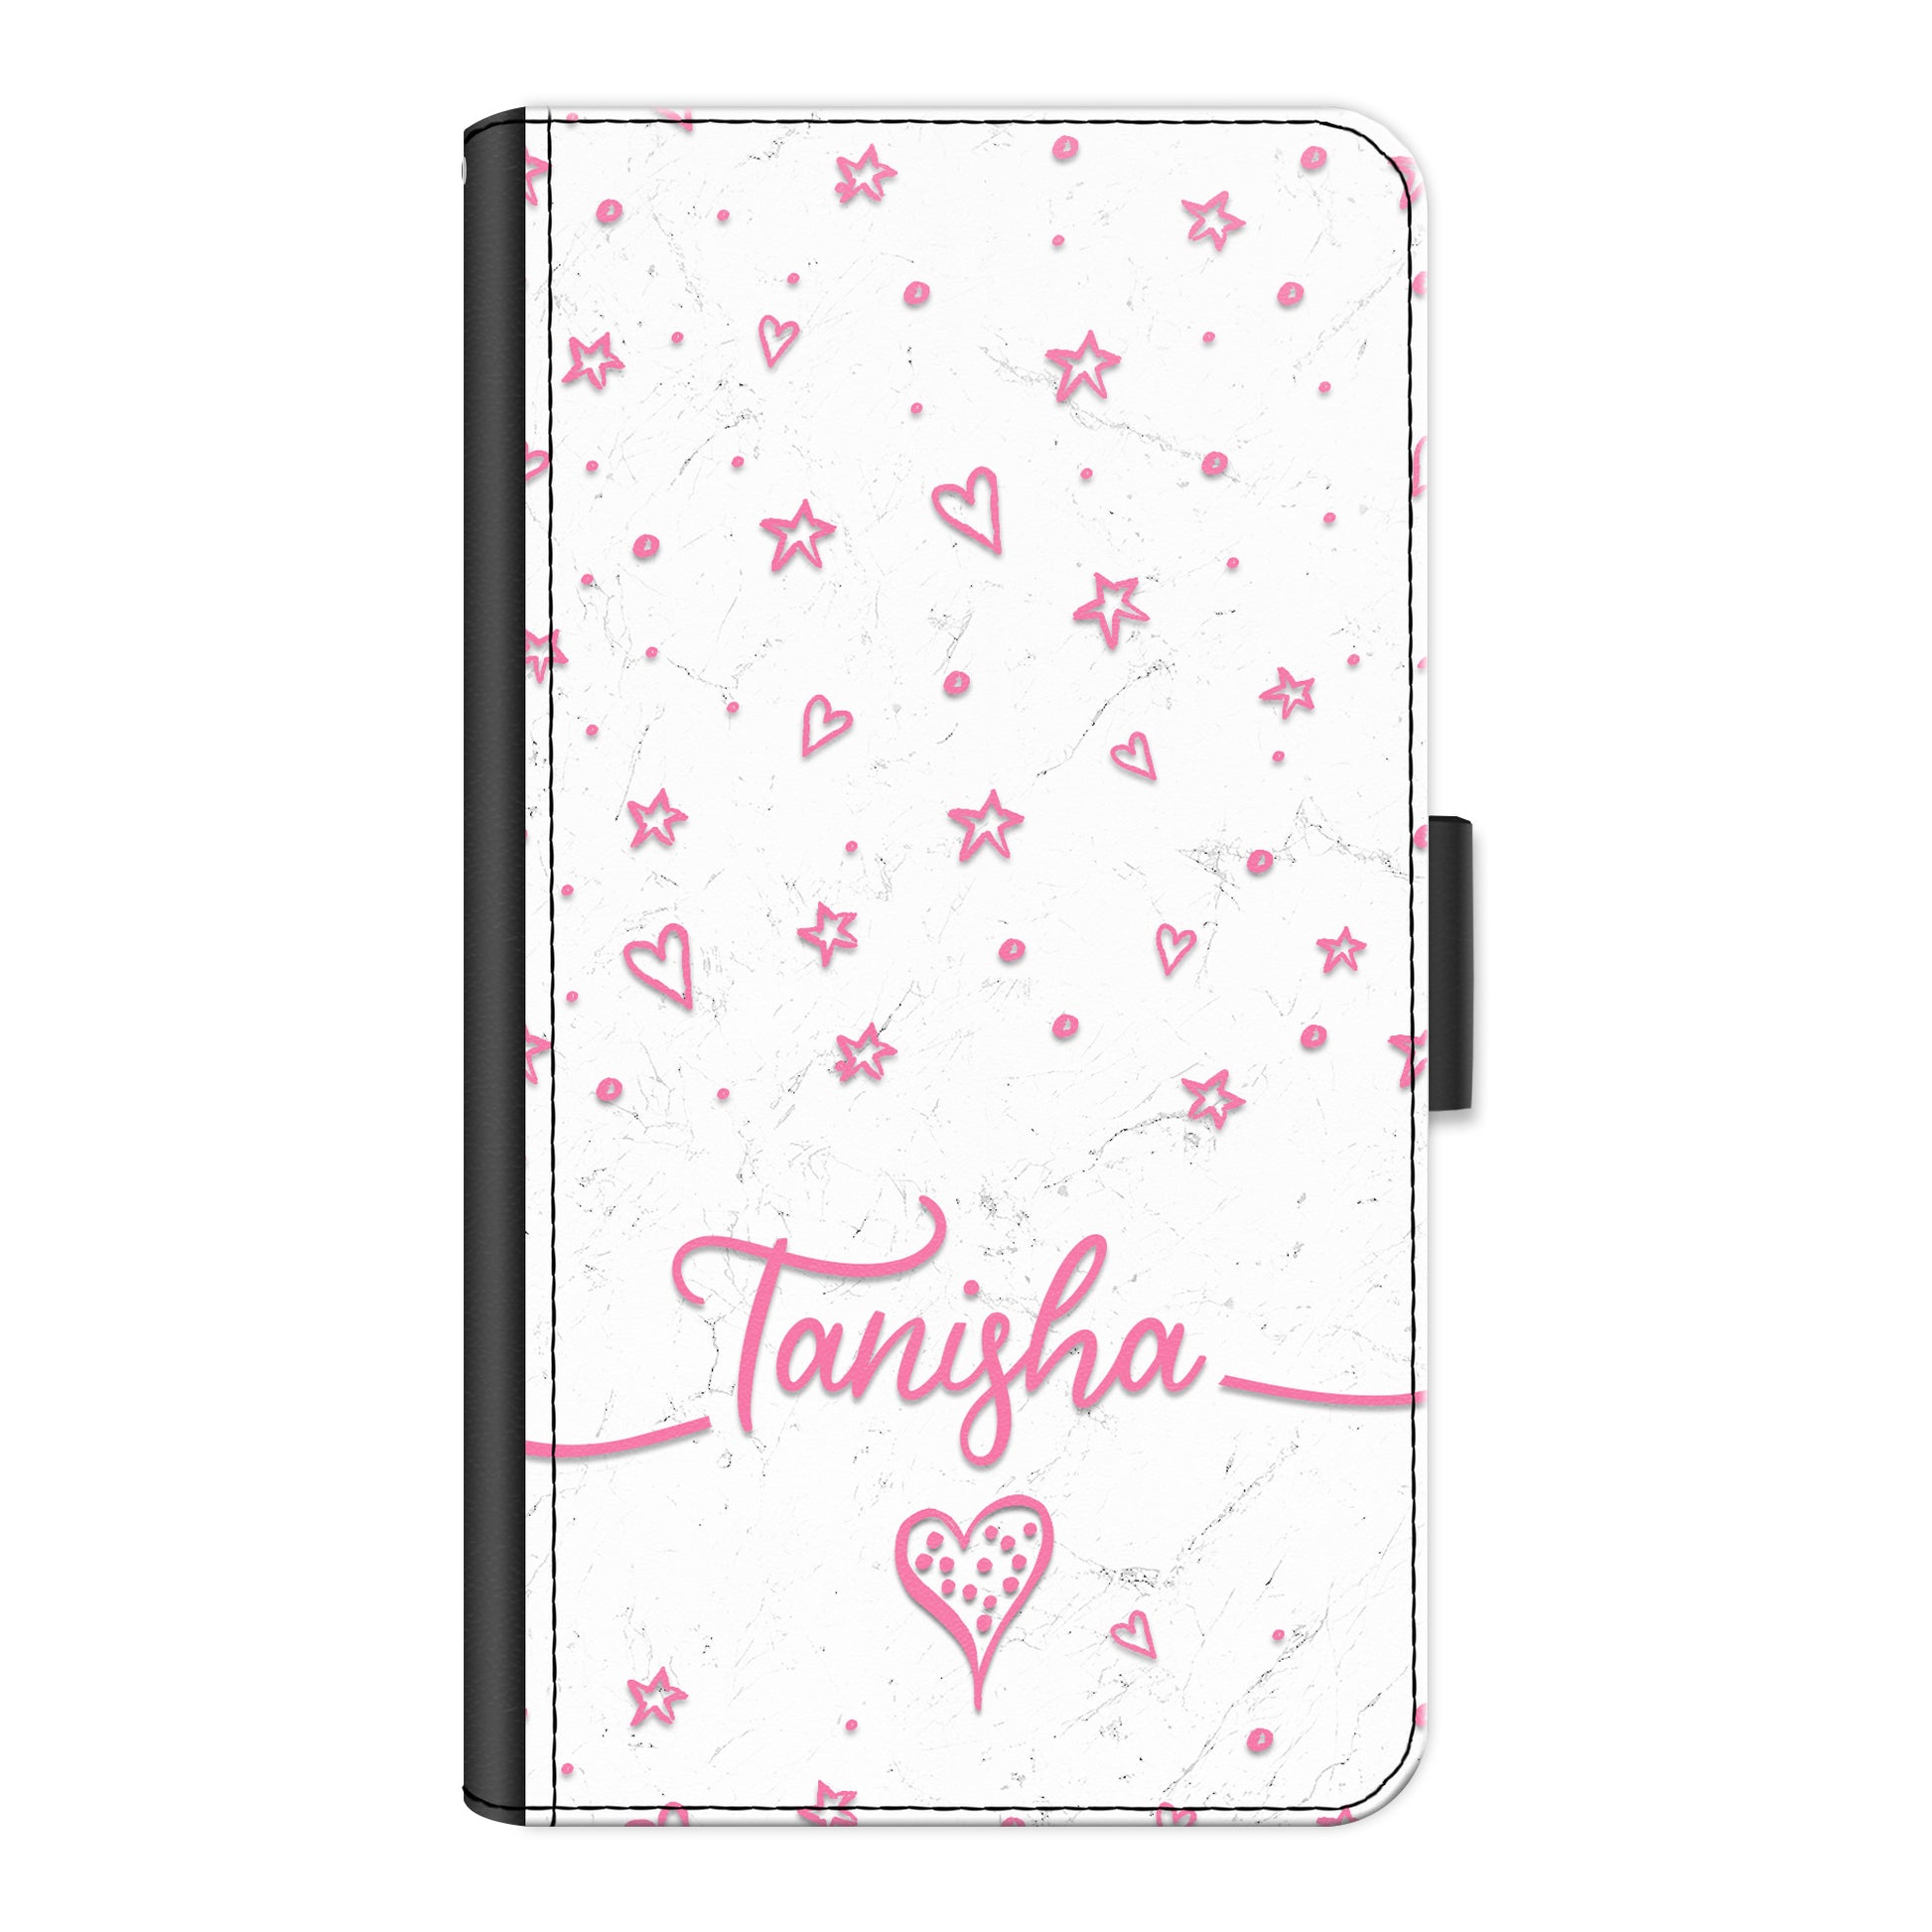 Personalised Huawei Phone Leather Wallet with Pink Stylish text, Stars and Hearts on White Marble